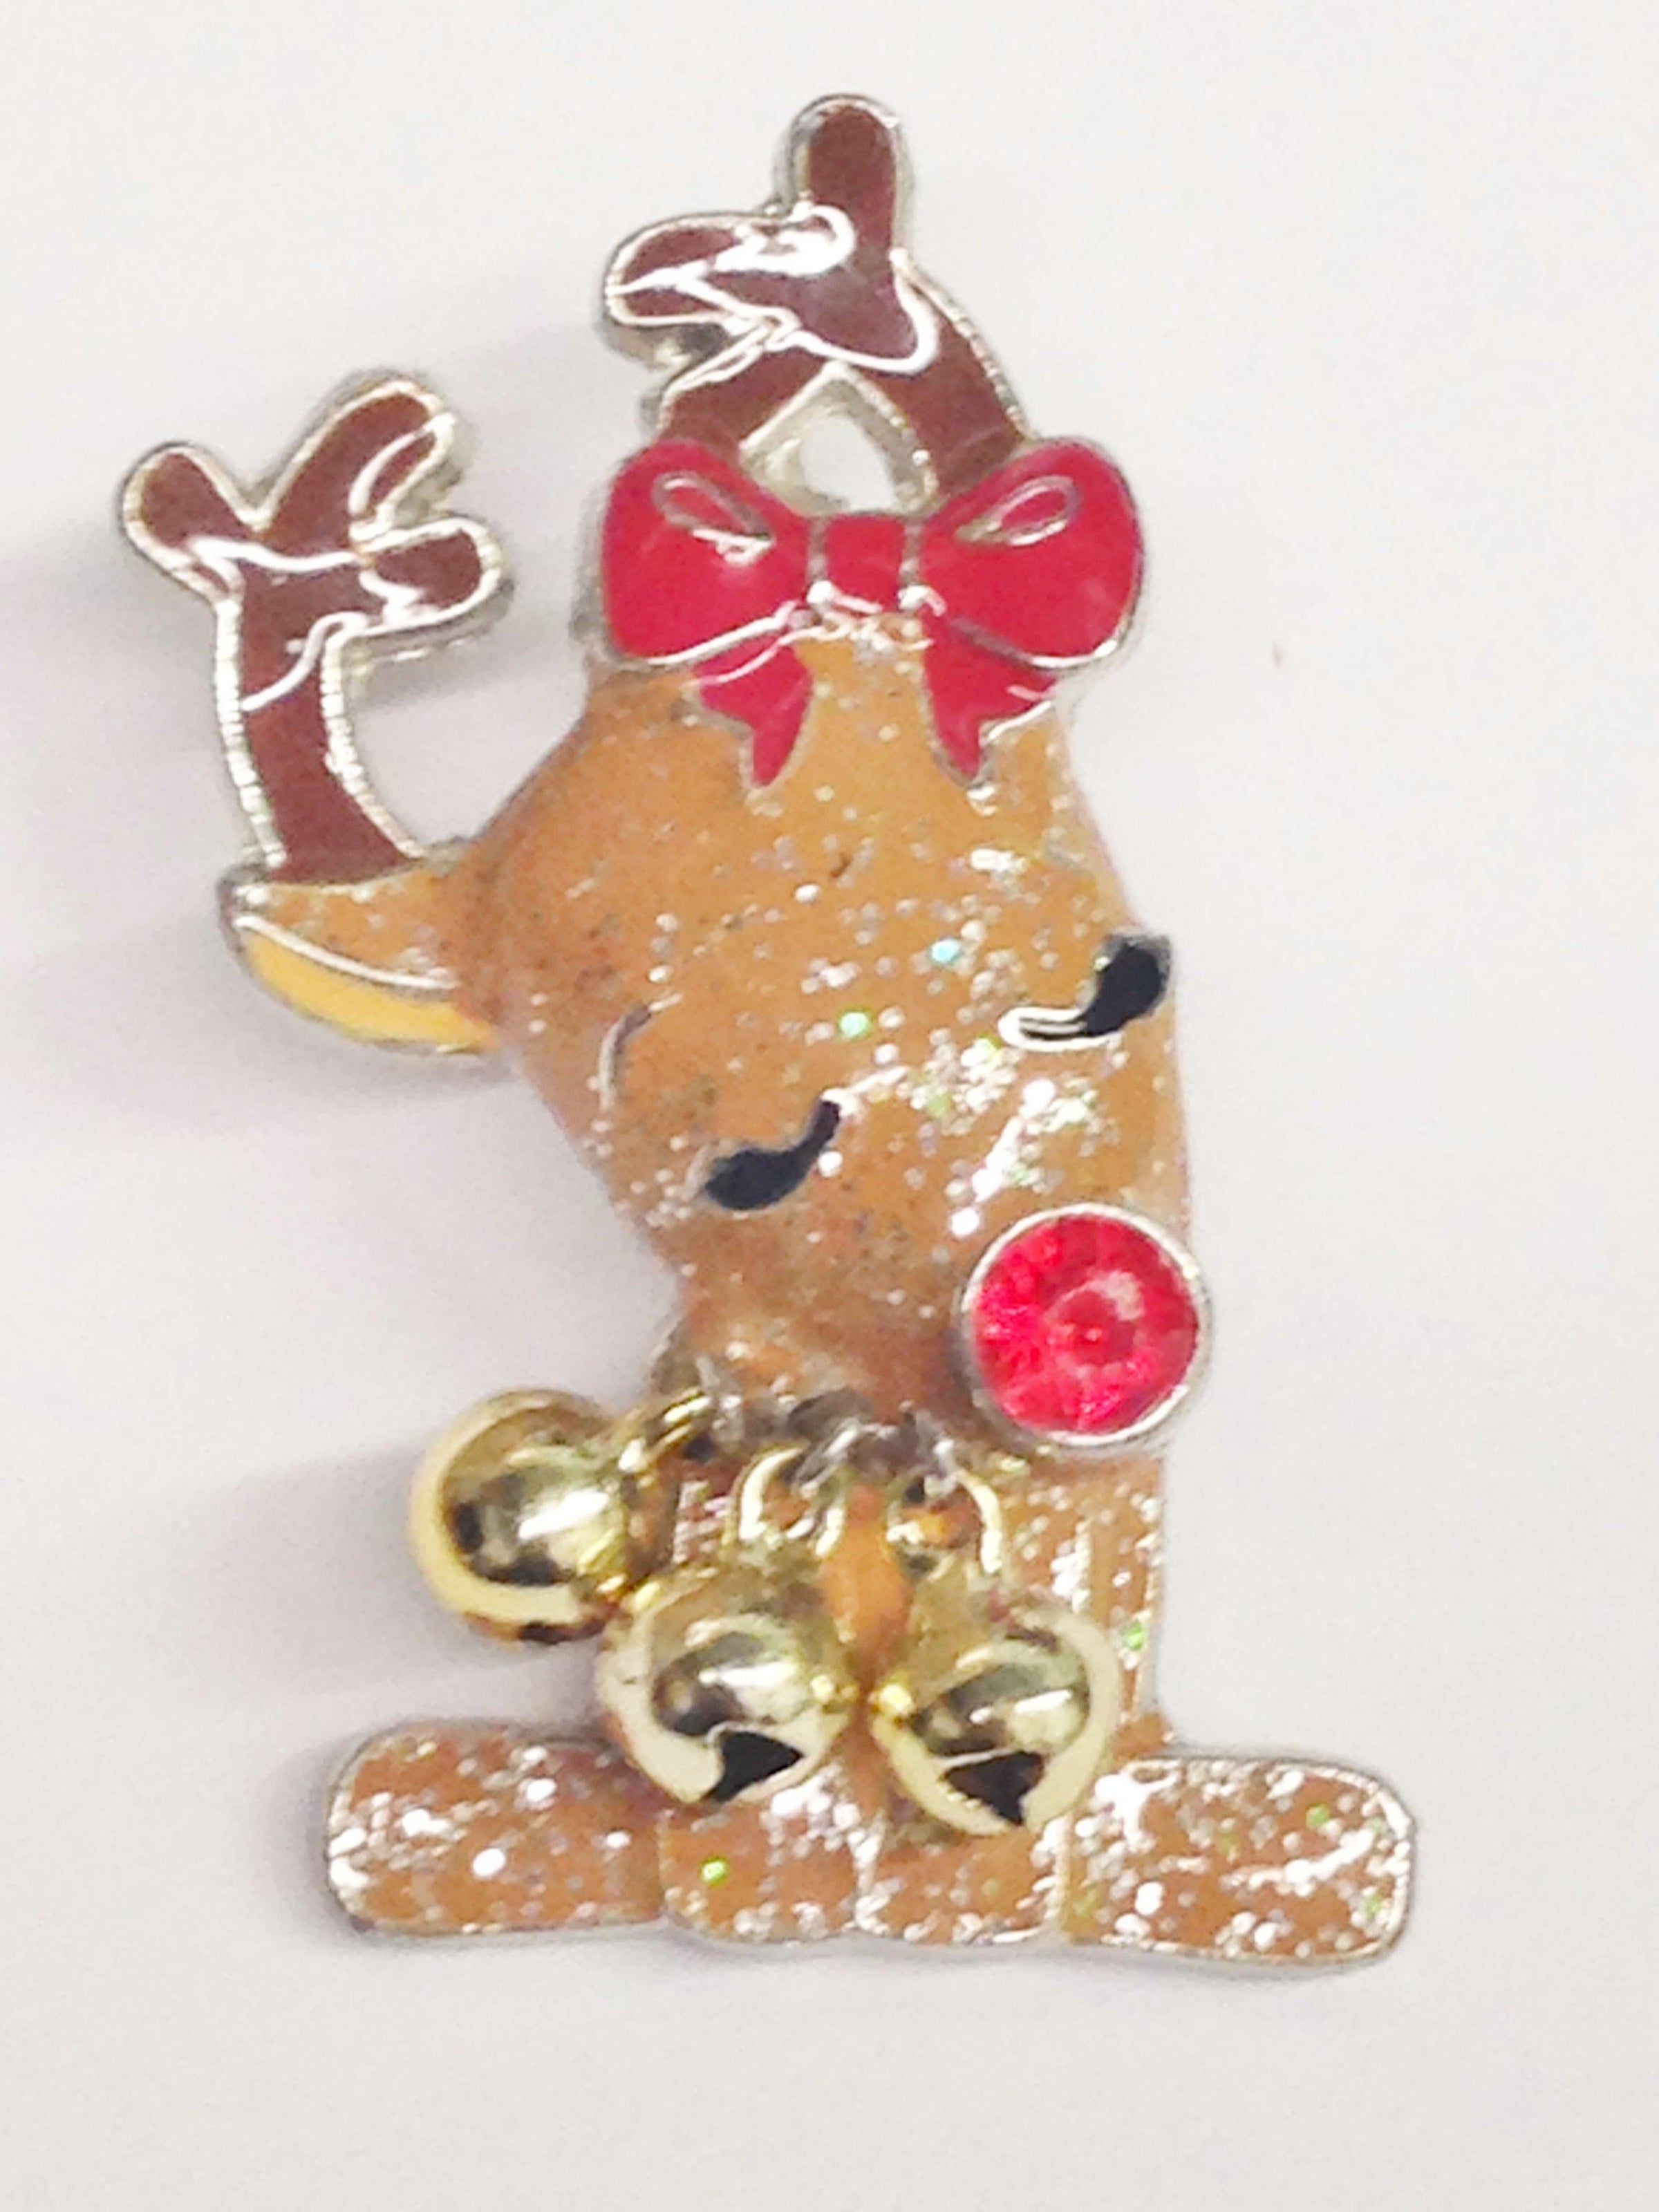 Vintage Rudolph The Red Nose Reindeer Brooch Pin With Bells - Hers and His Treasures